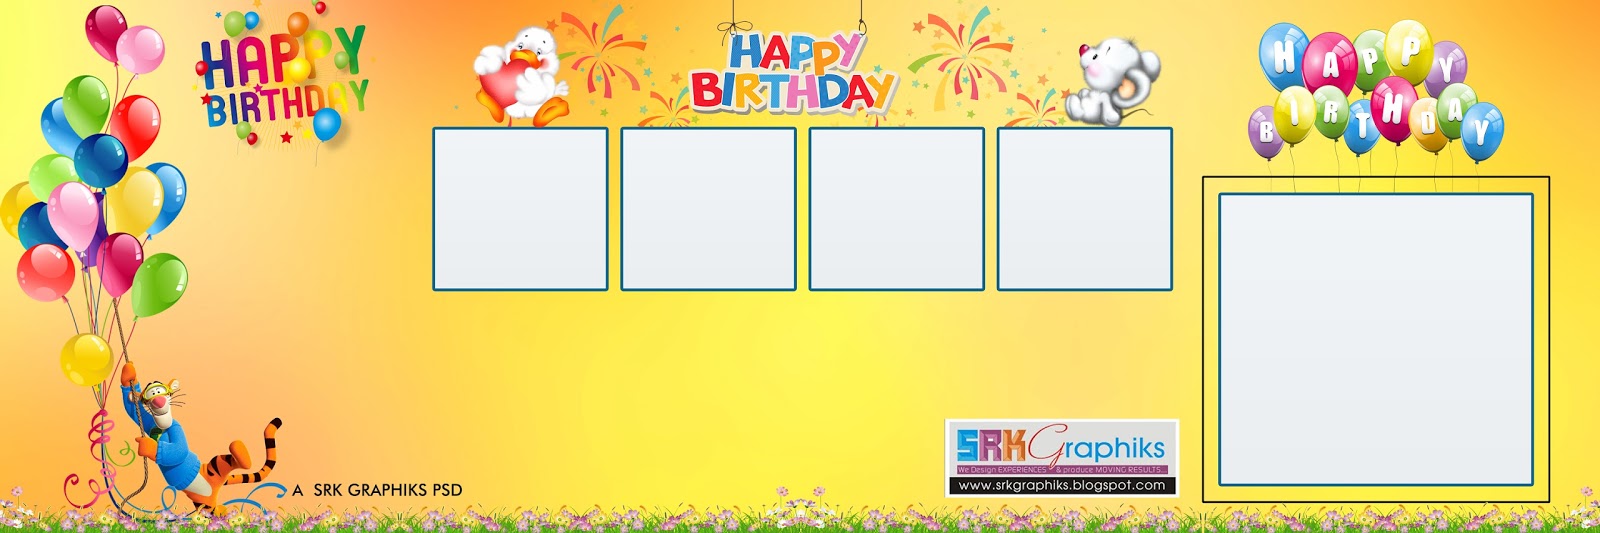 Psd Birthday Backgrounds For Photoshop Free Download - Happy Birthday Background Psd Free Download , HD Wallpaper & Backgrounds